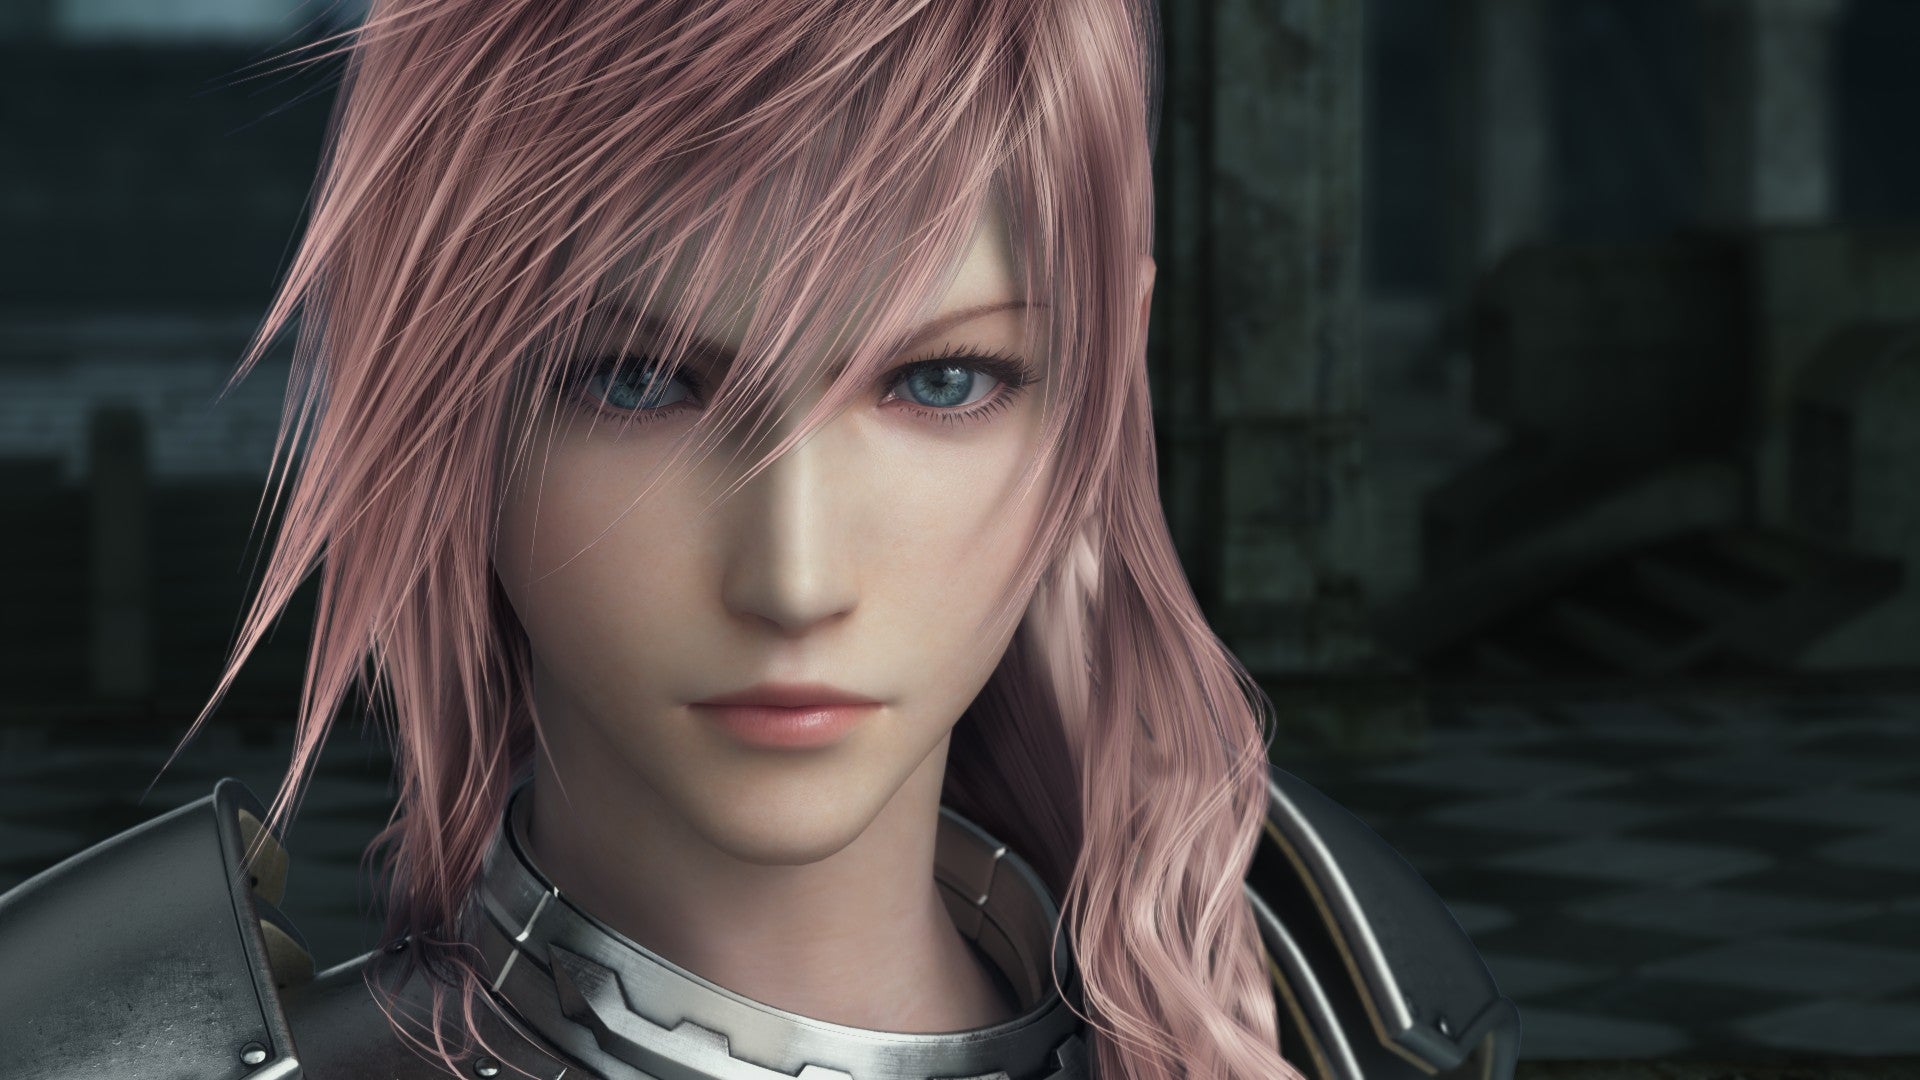 Final Fantasy XIII & XIII-2 Double Pack